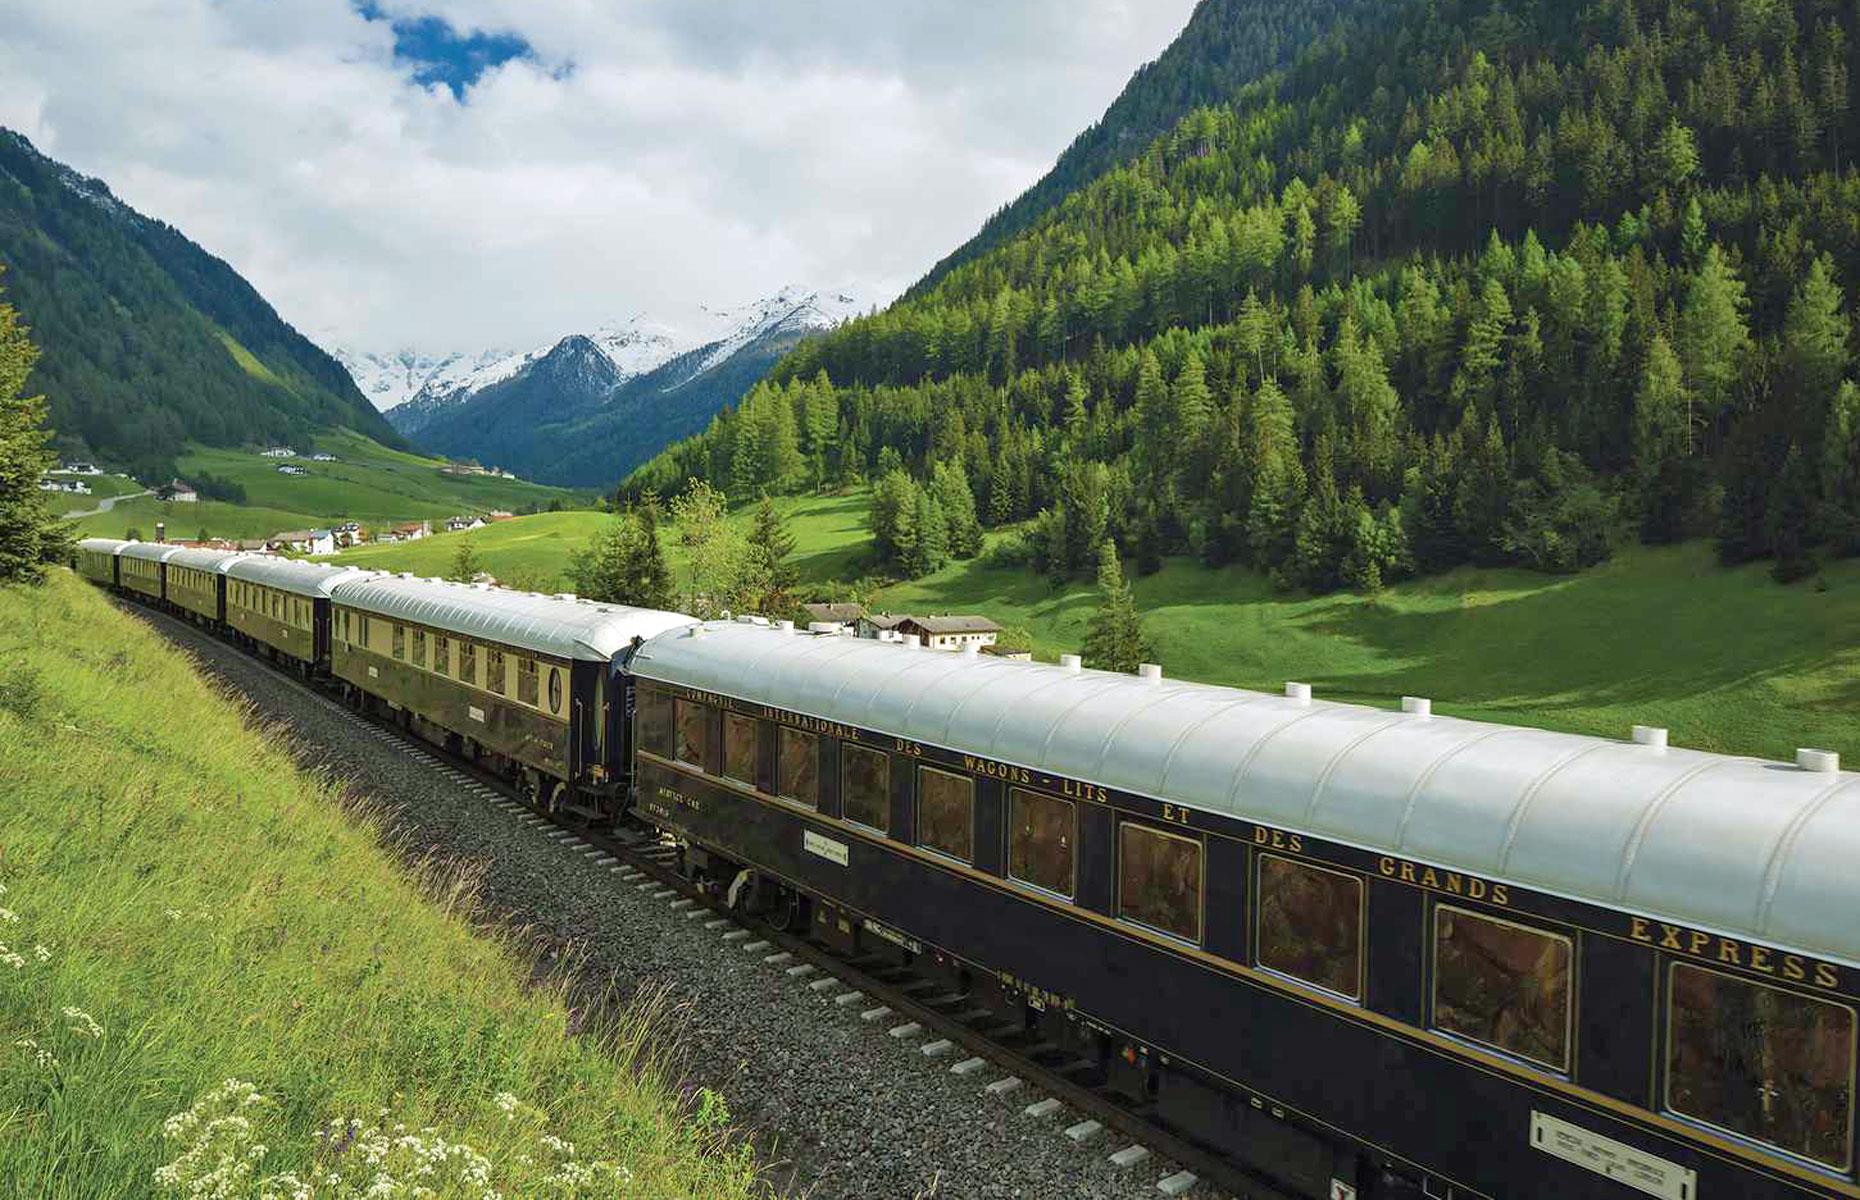 <p>The world's most iconic train, Belmond's <em>Venice Simplon-Orient-Express</em> is simply the crème de la crème of travelling by rail. </p>  <p>The Art Deco beauty, which travels between London and Venice, as well as a number of other destinations around the continent, exudes timeless glamour and offers unbridled luxury.</p>  <p>Made up of 17 impeccably restored 1920s and 1930s carriages, the train transports its well-heeled passengers back to the golden age of European rail travel.</p>